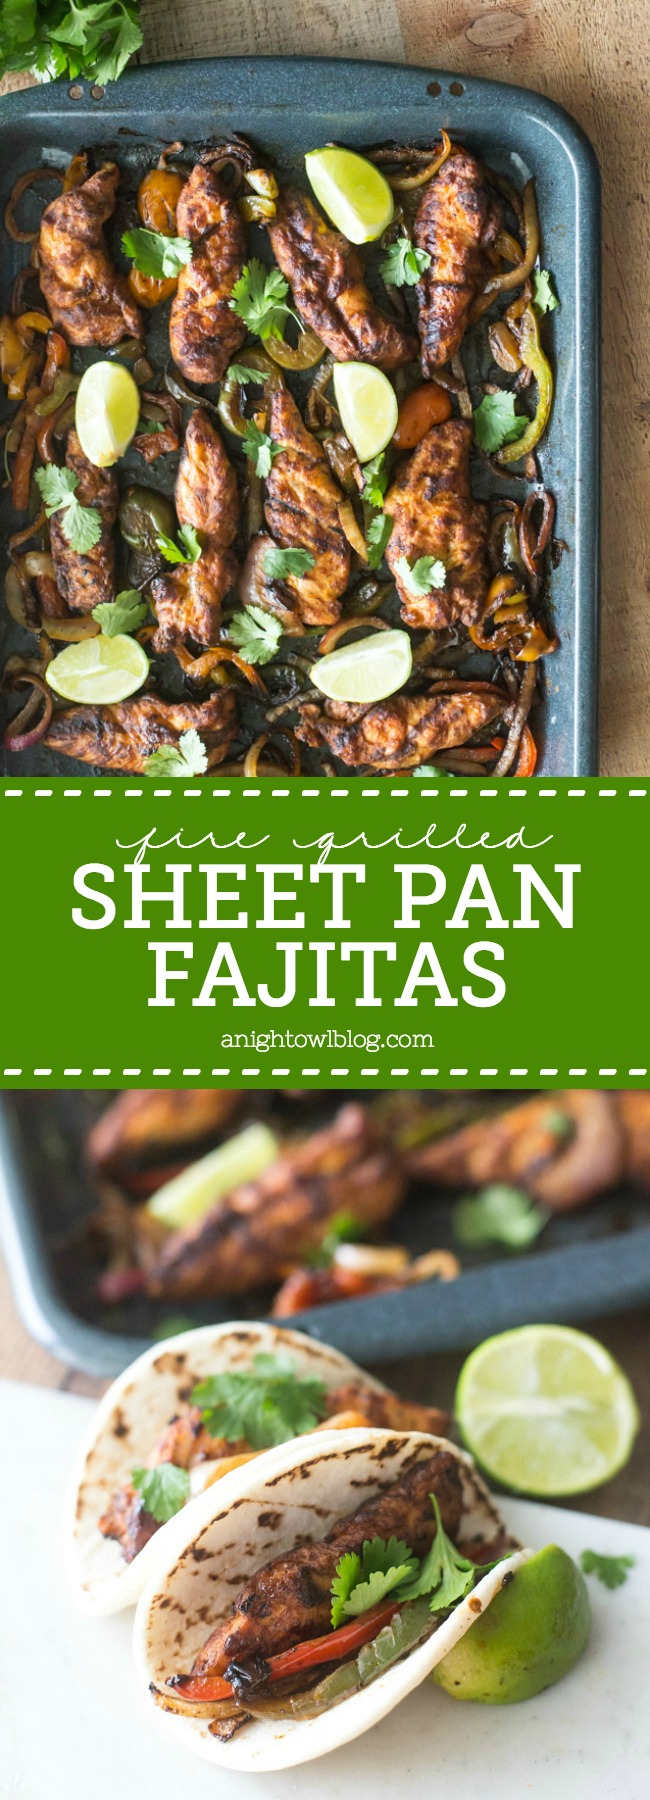 These Fire Grilled Sheet Pan Fajitas are packed full of flavor and are ready in just 20 minutes!